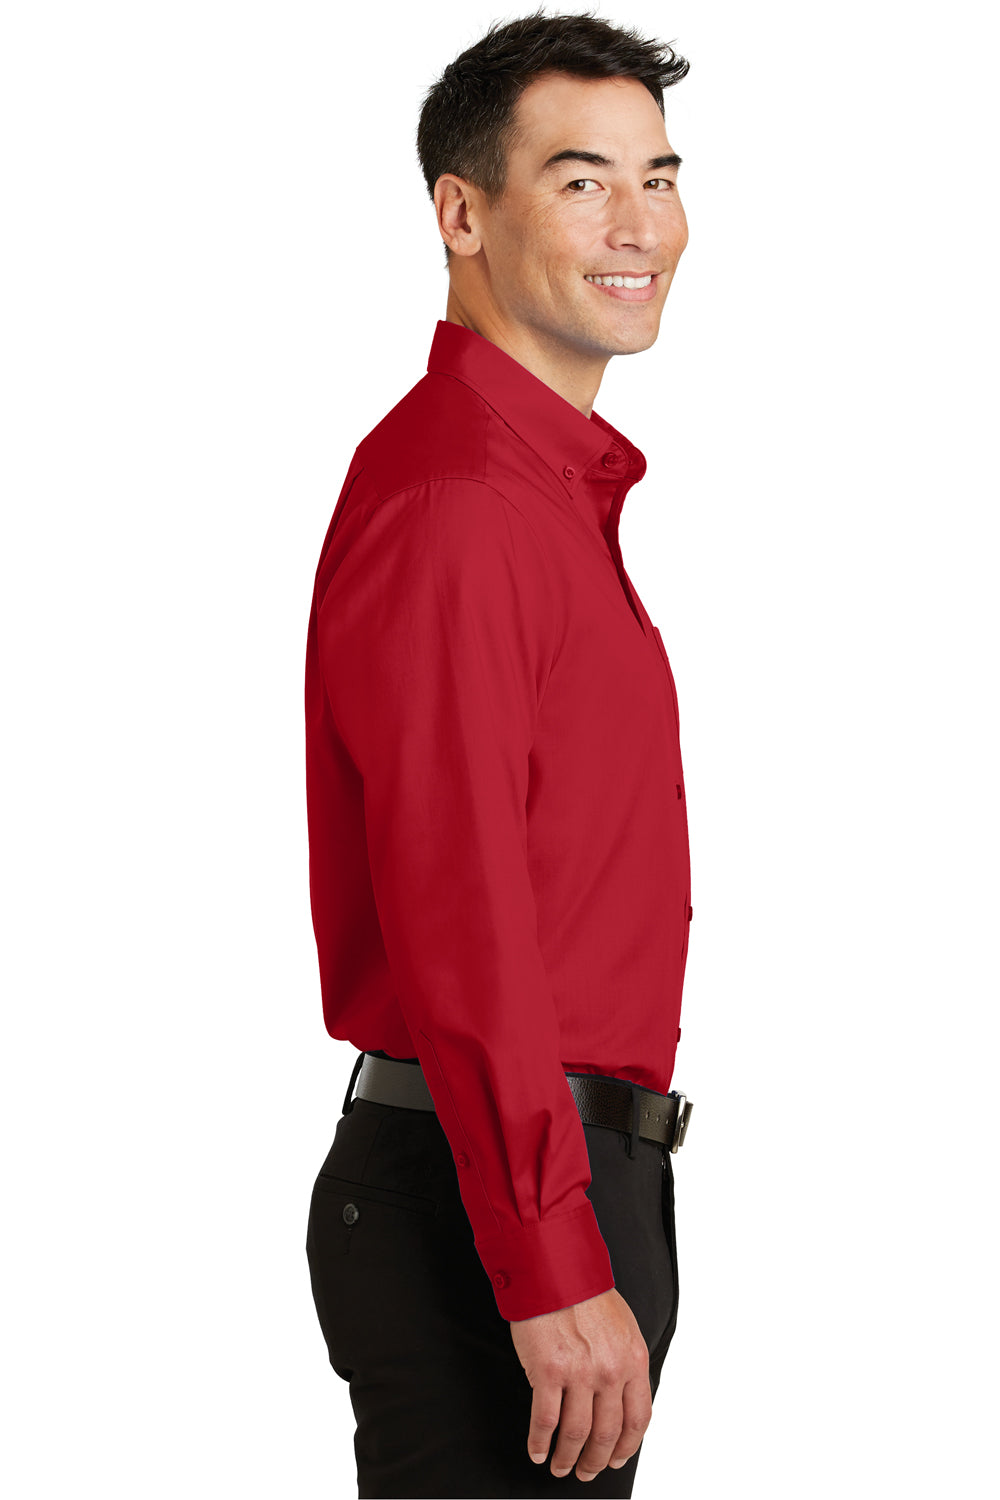 Port Authority S663 Mens SuperPro Wrinkle Resistant Long Sleeve Button Down Shirt w/ Pocket Red Side